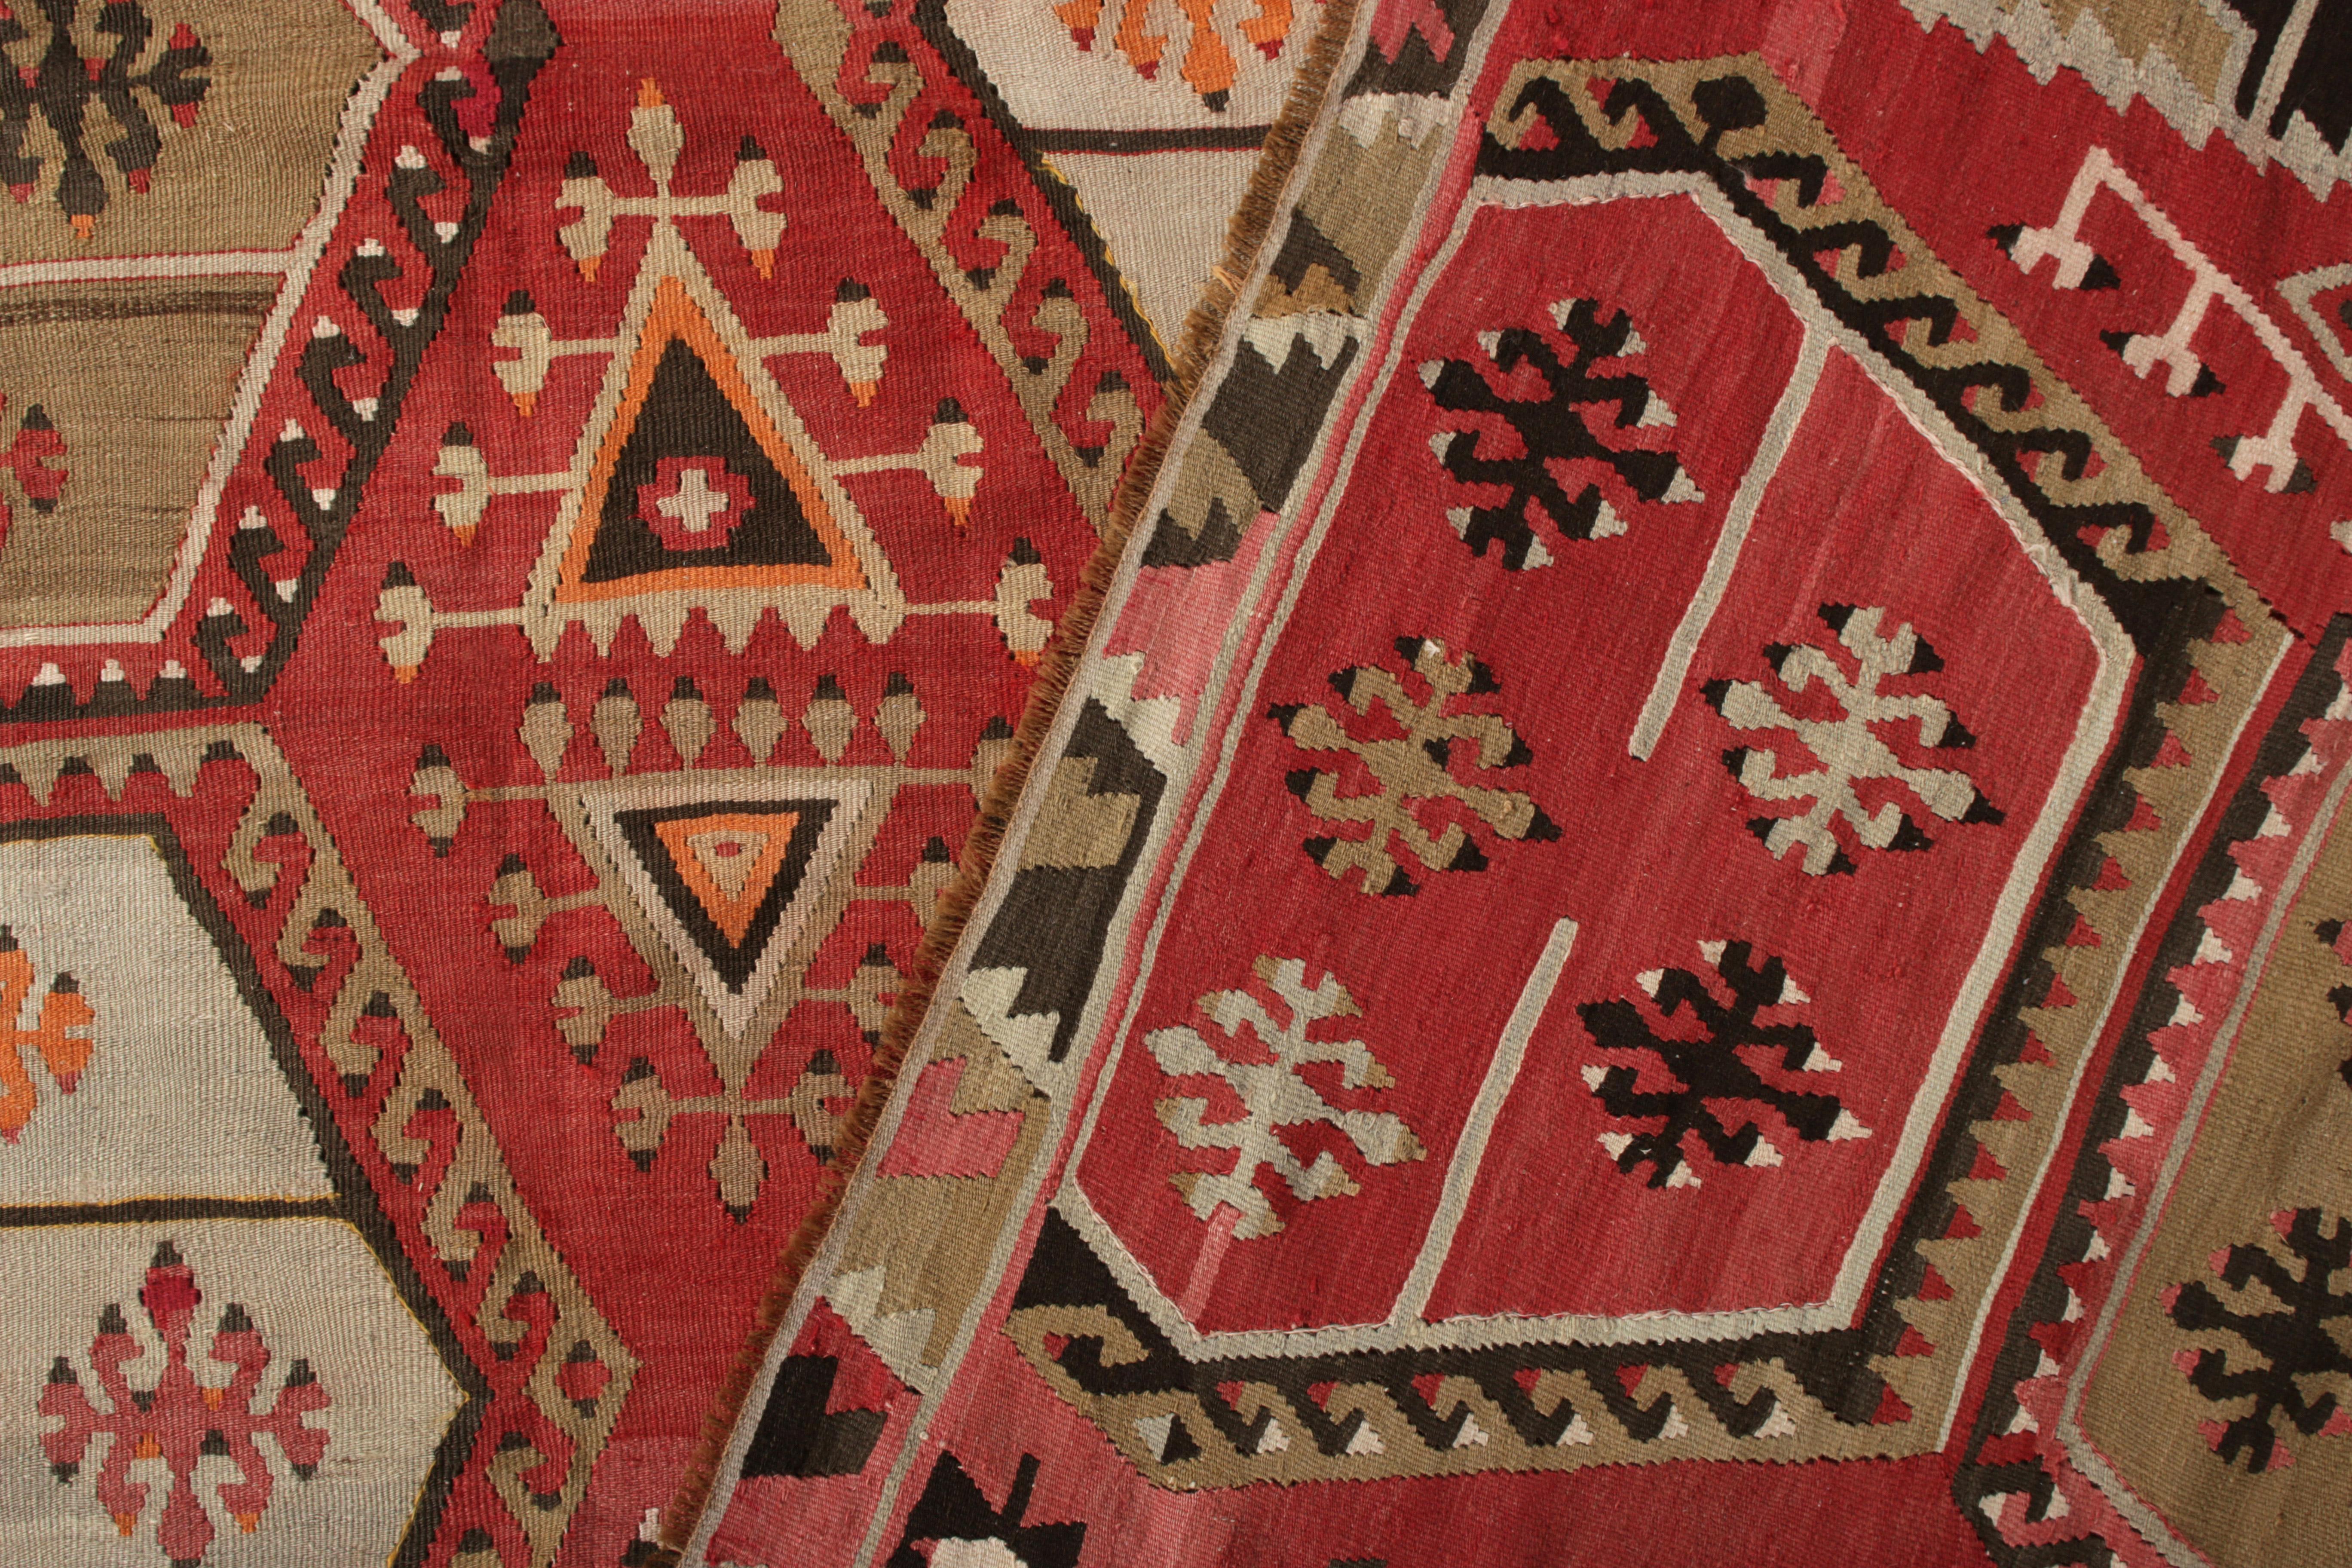 Vintage Midcentury Kilim Rug Red Pink All-Over Geometric Pattern by Rug & Kilim In Good Condition For Sale In Long Island City, NY